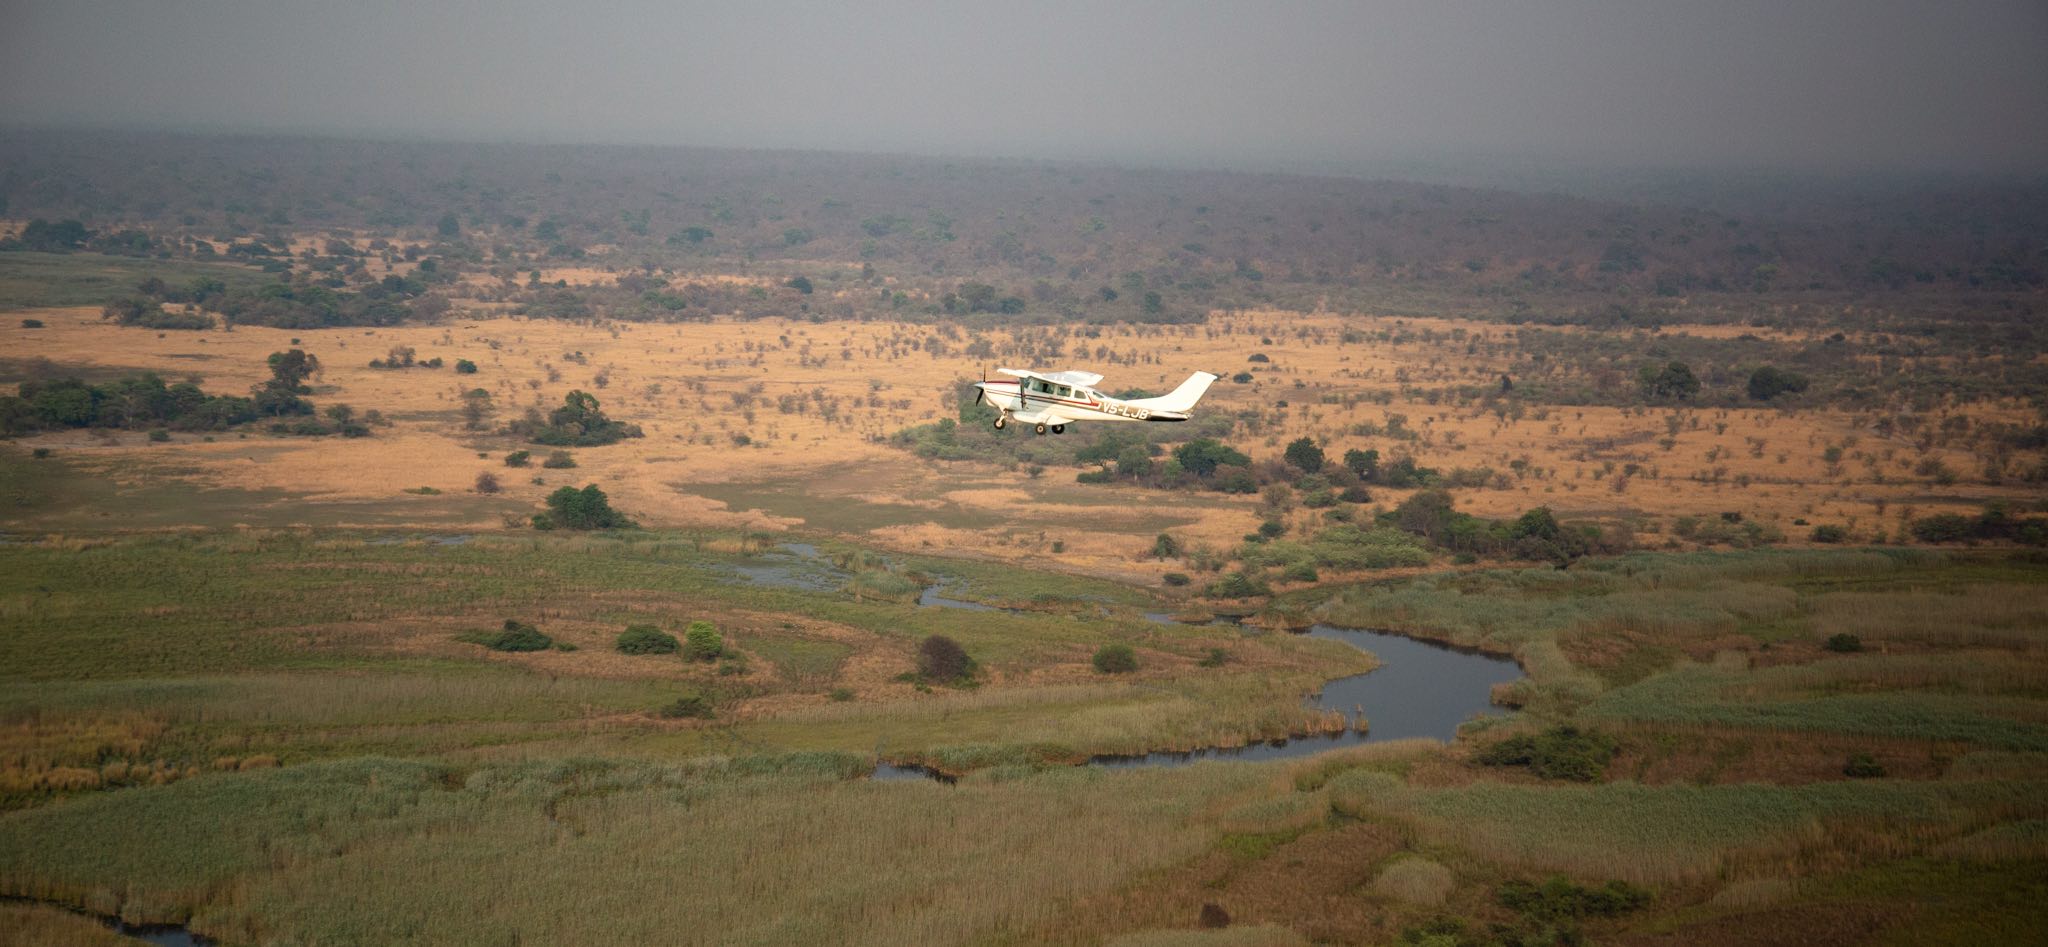 A Cessna light aircraft flying over a wide river in a green landscape.